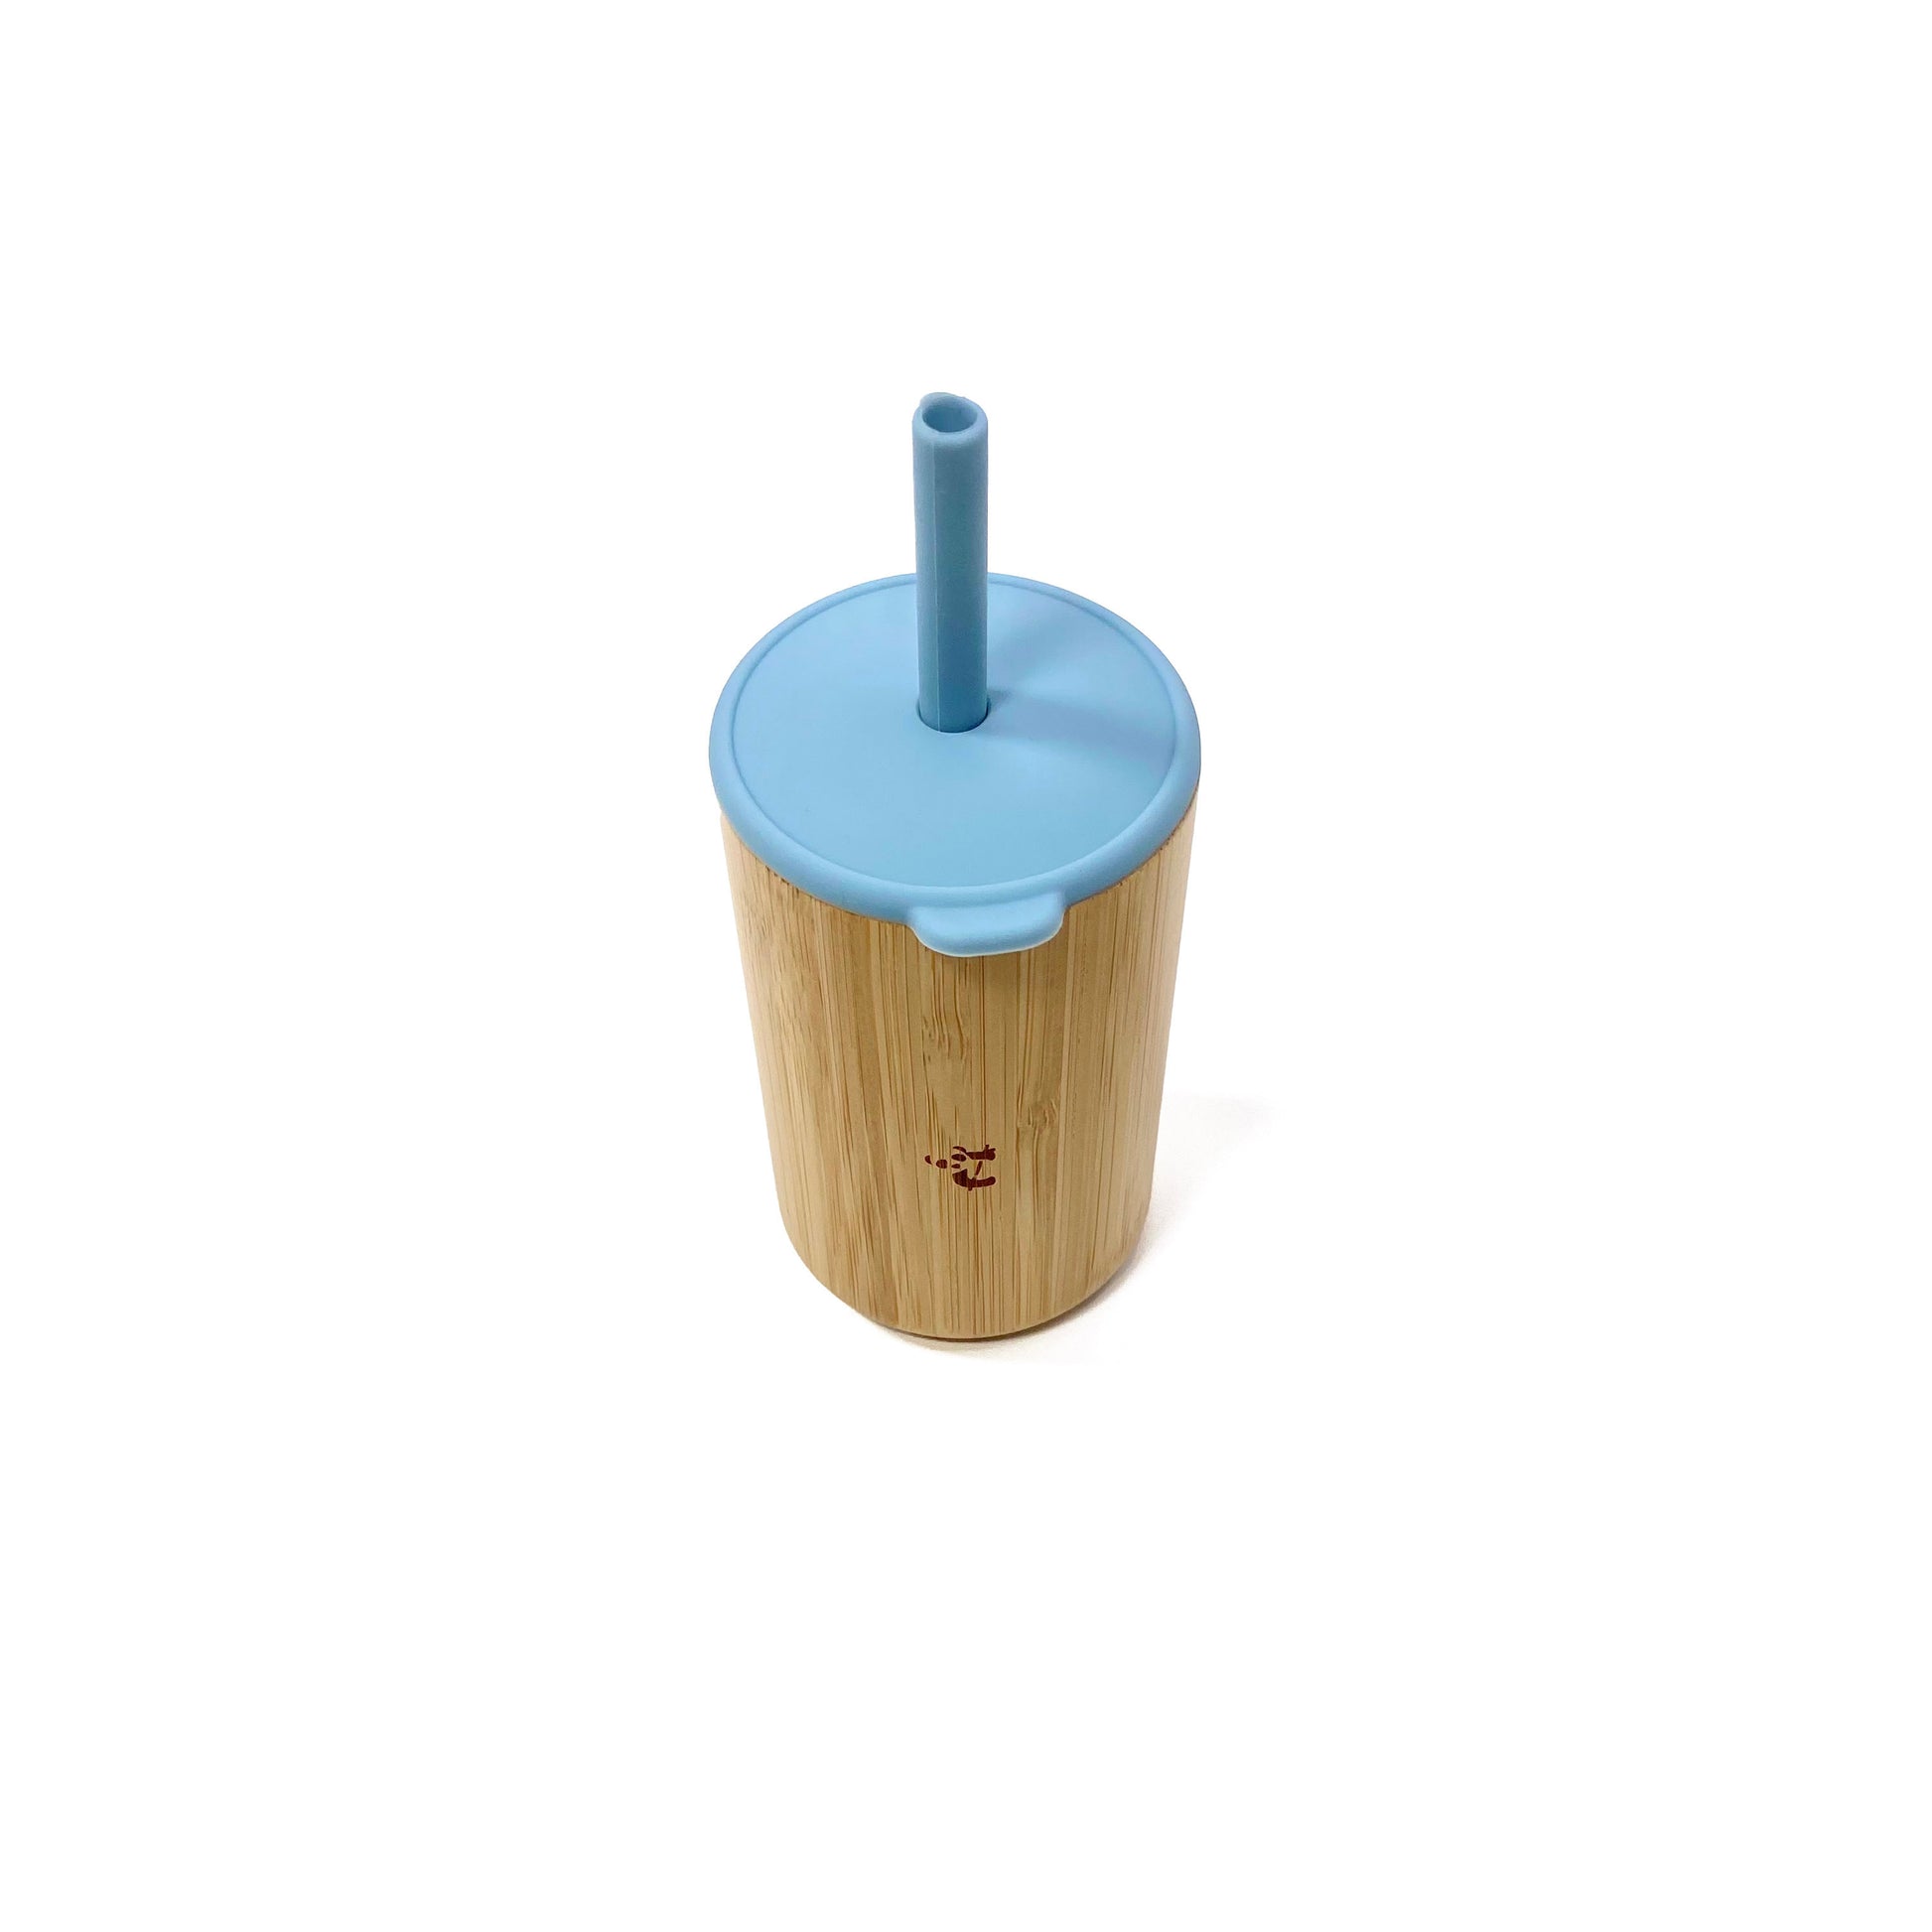 A children’s bamboo drinking cup, with a sky blue silicone lid and matching straw. View shows the cup with lid and straw attached.